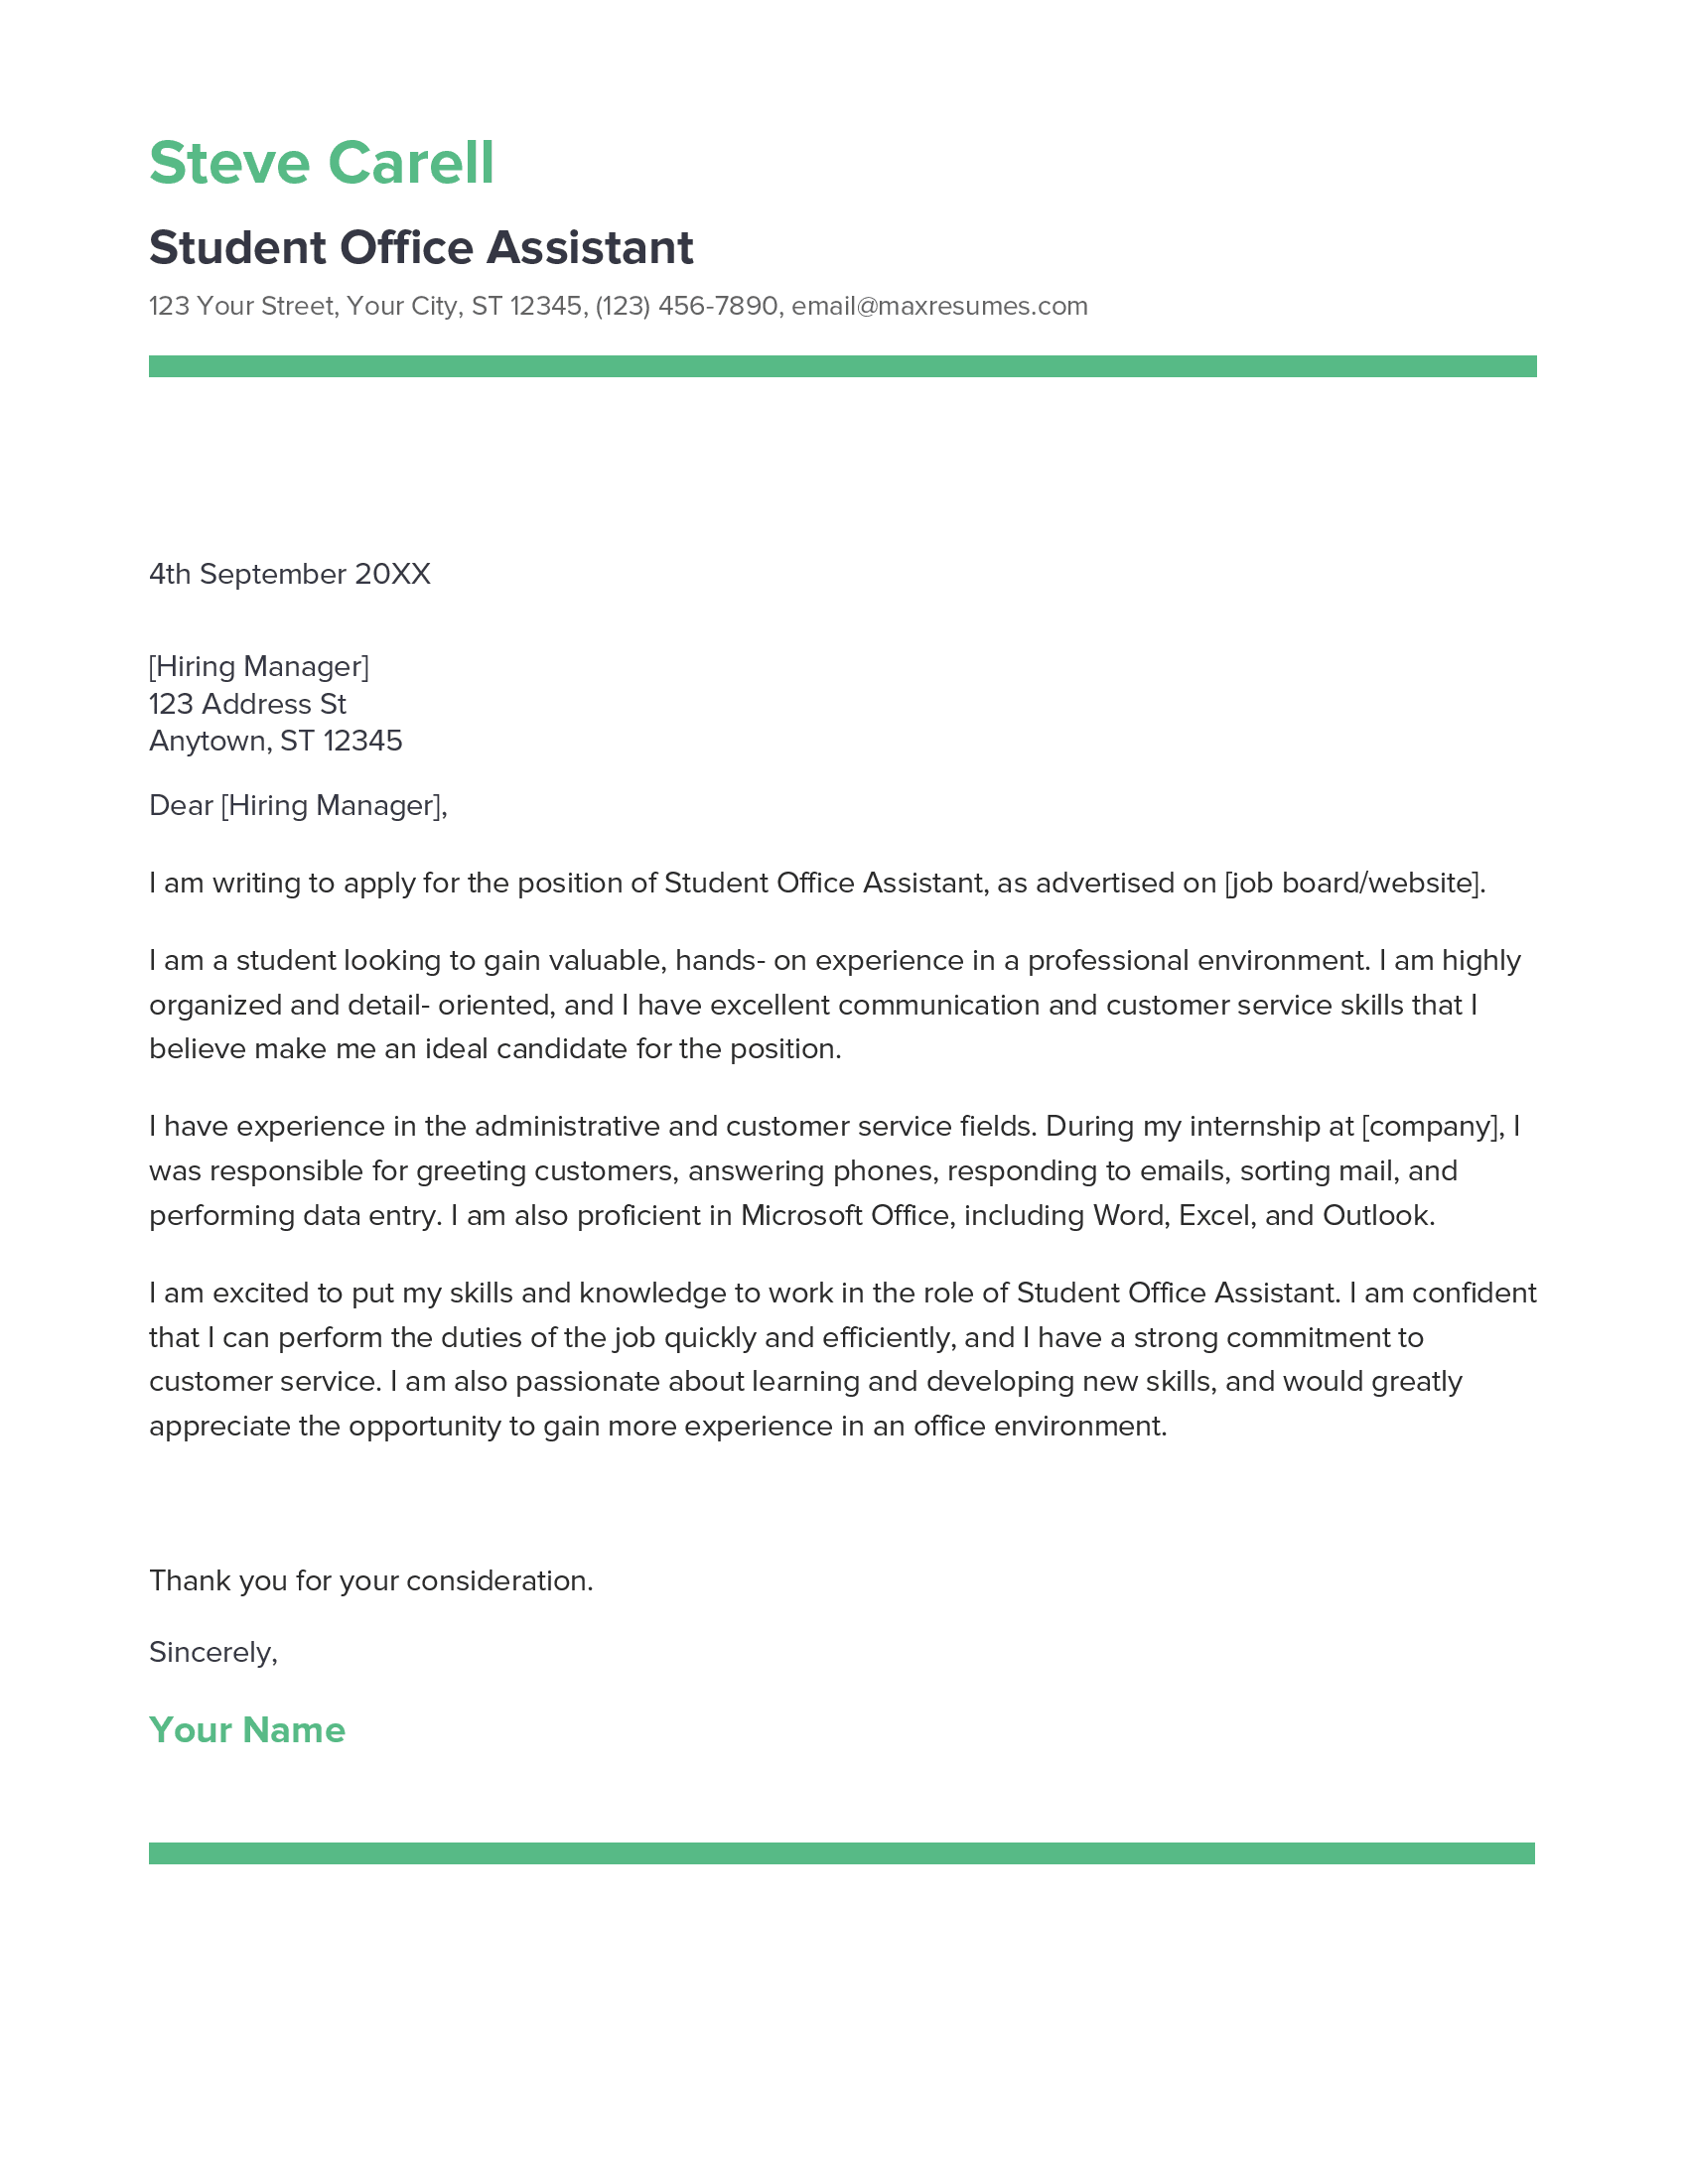 Student Office Assistant Cover Letter Example